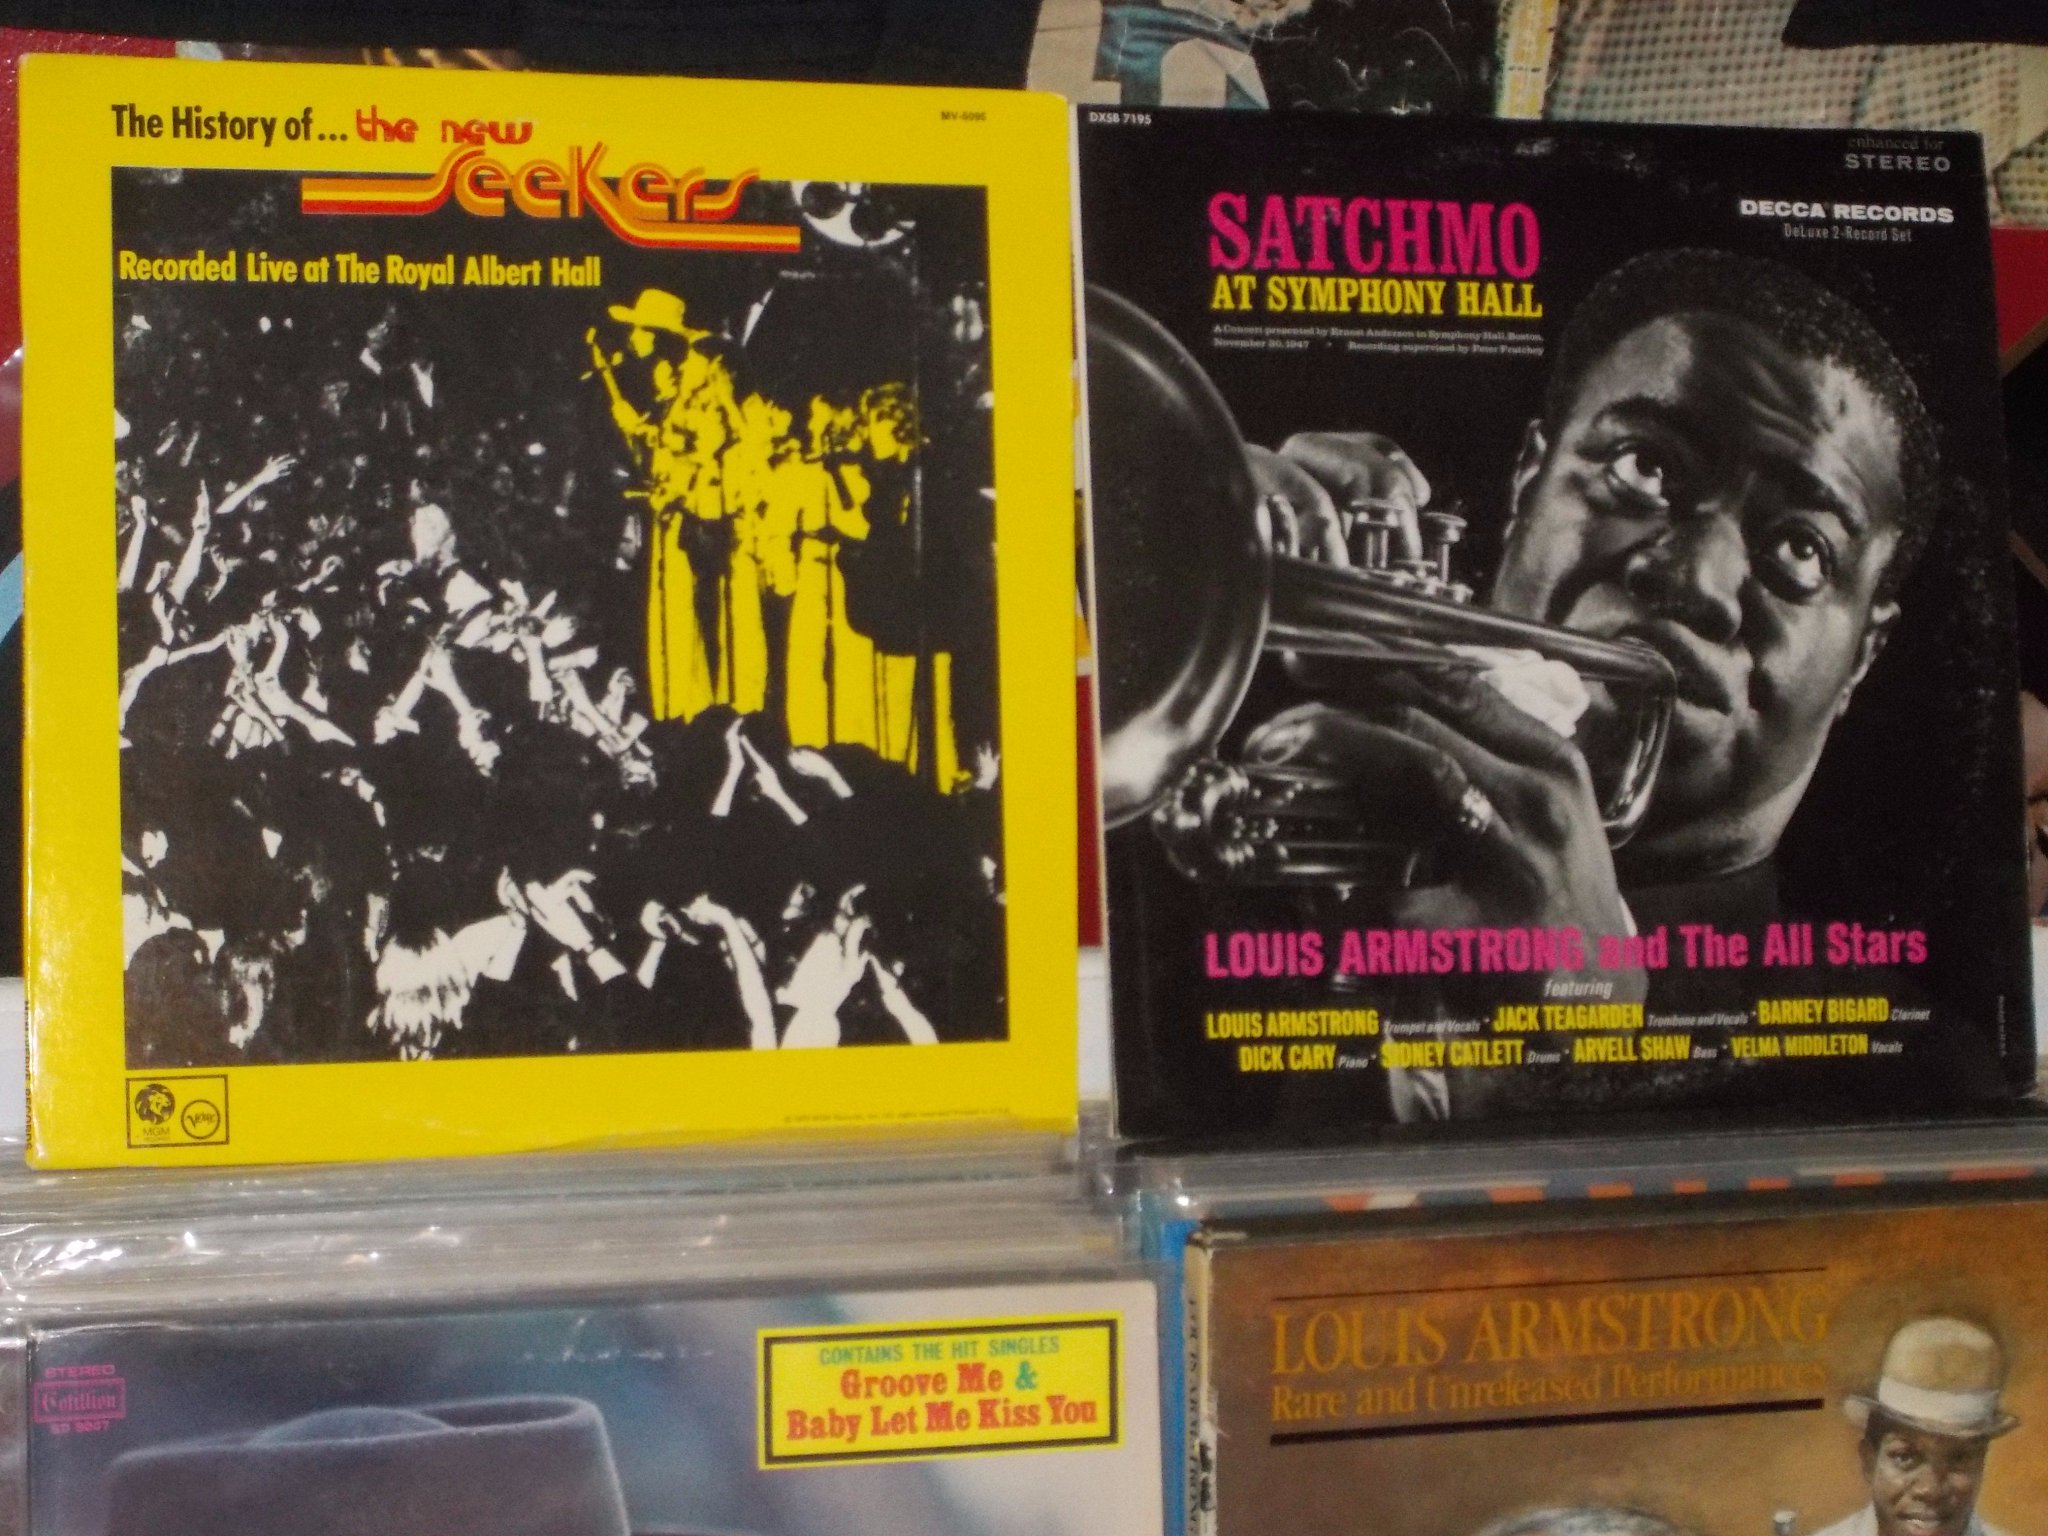 Happy Birthday to Paul Layton of the New Seekers & the late Louis Armstrong 